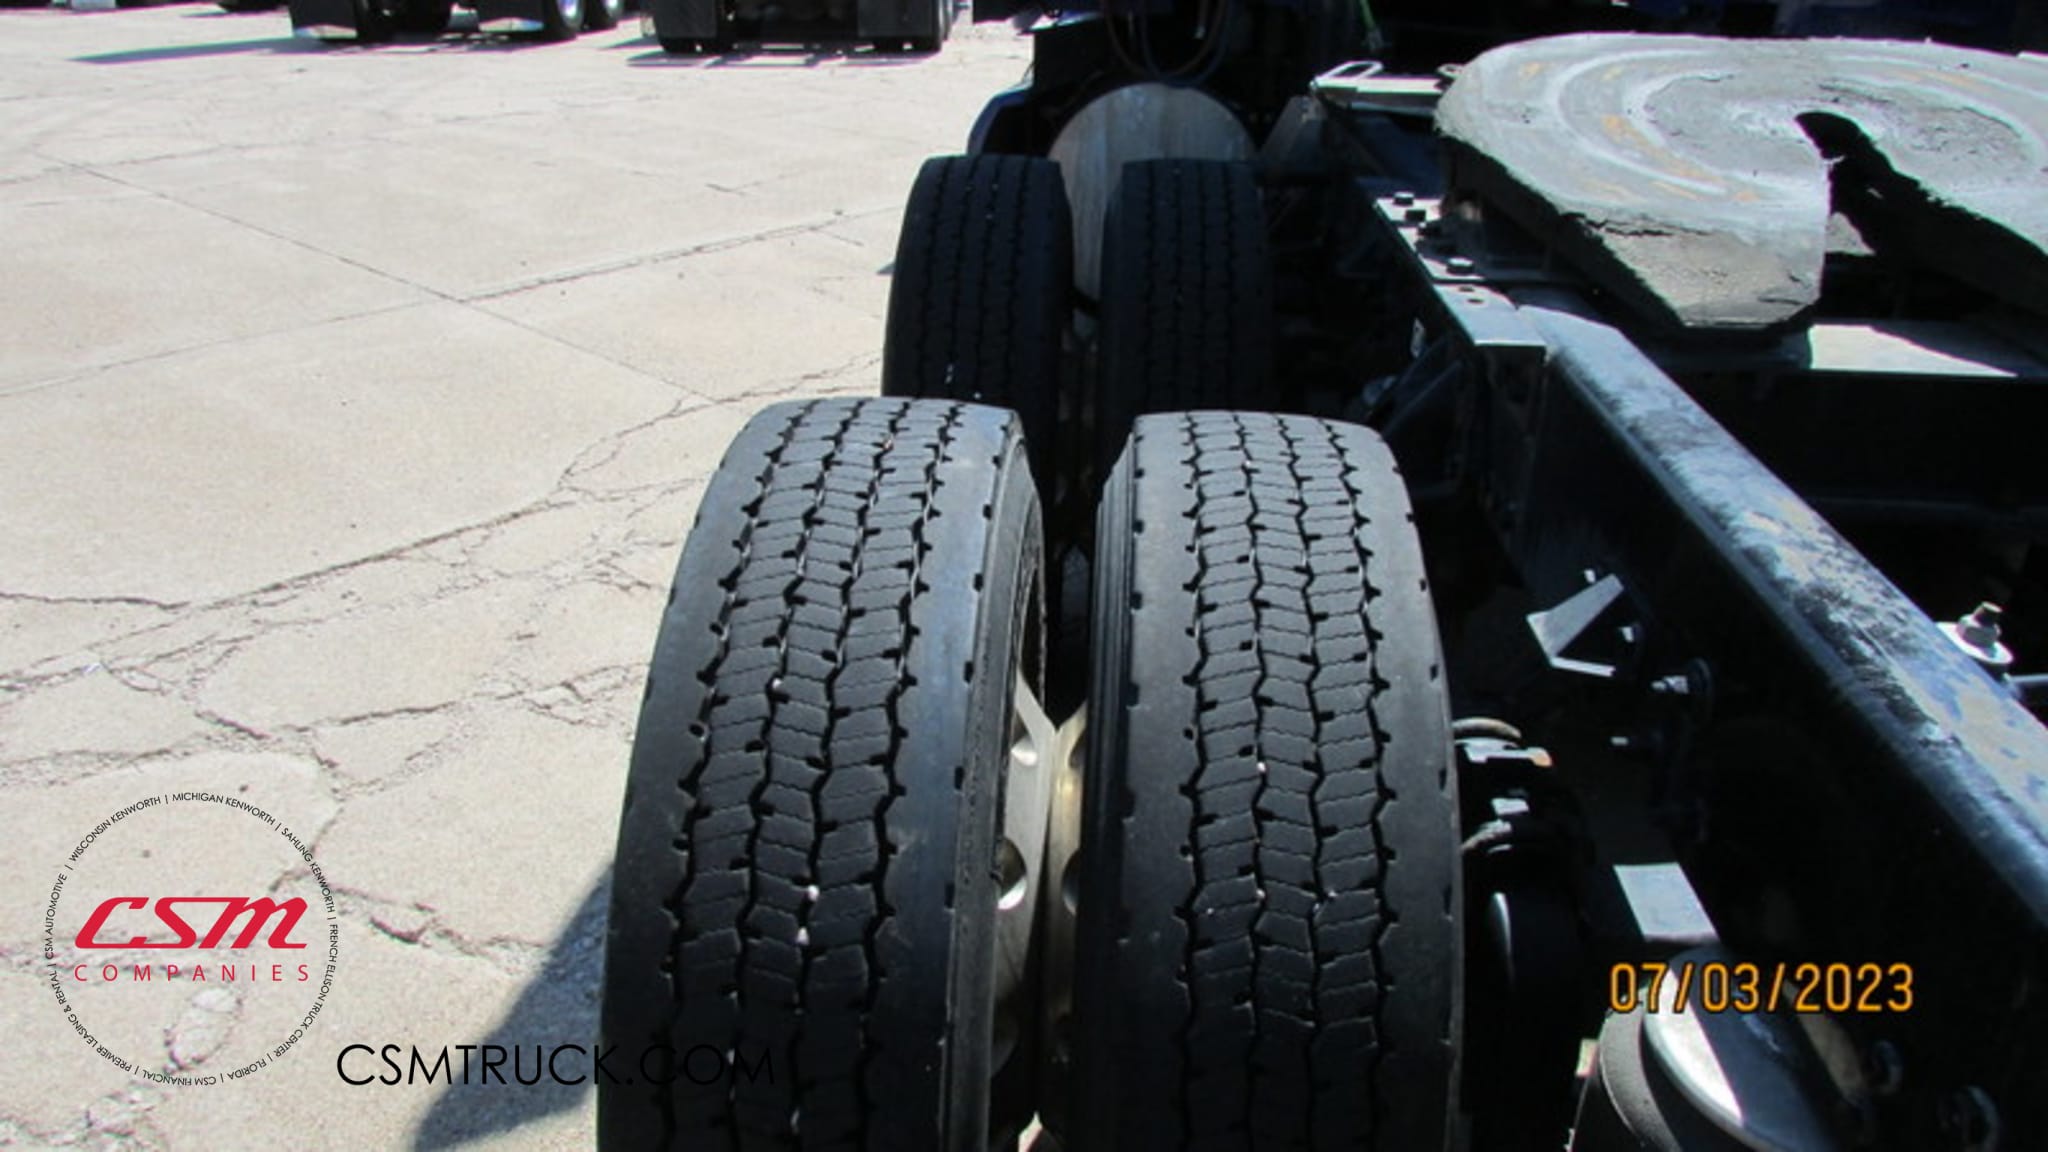 Driver side rear frame and tire tread for this 2020 Kenworth T680 (Stock number: ULJ354405)